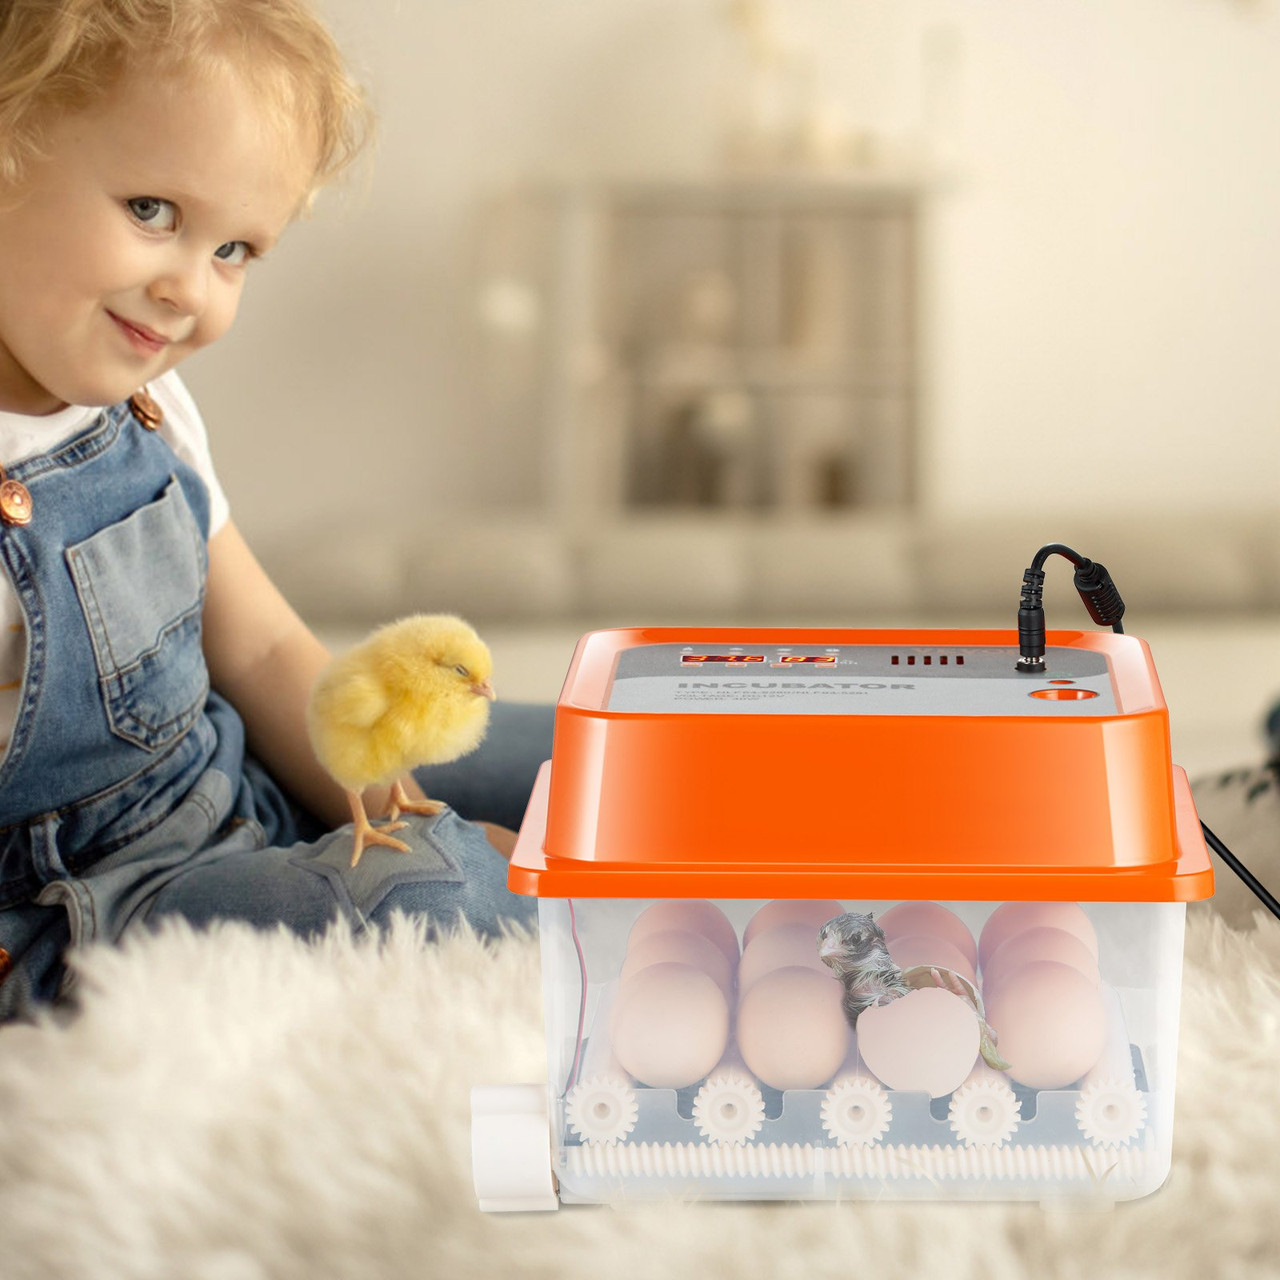 VEVOR Egg Incubator, Incubators for Hatching Eggs, Automatic Egg Turner with with Temperature and Humidity Control, 12 Eggs Poultry Hatcher with ABS Transparent Shell for Chicken, Duck, Quail